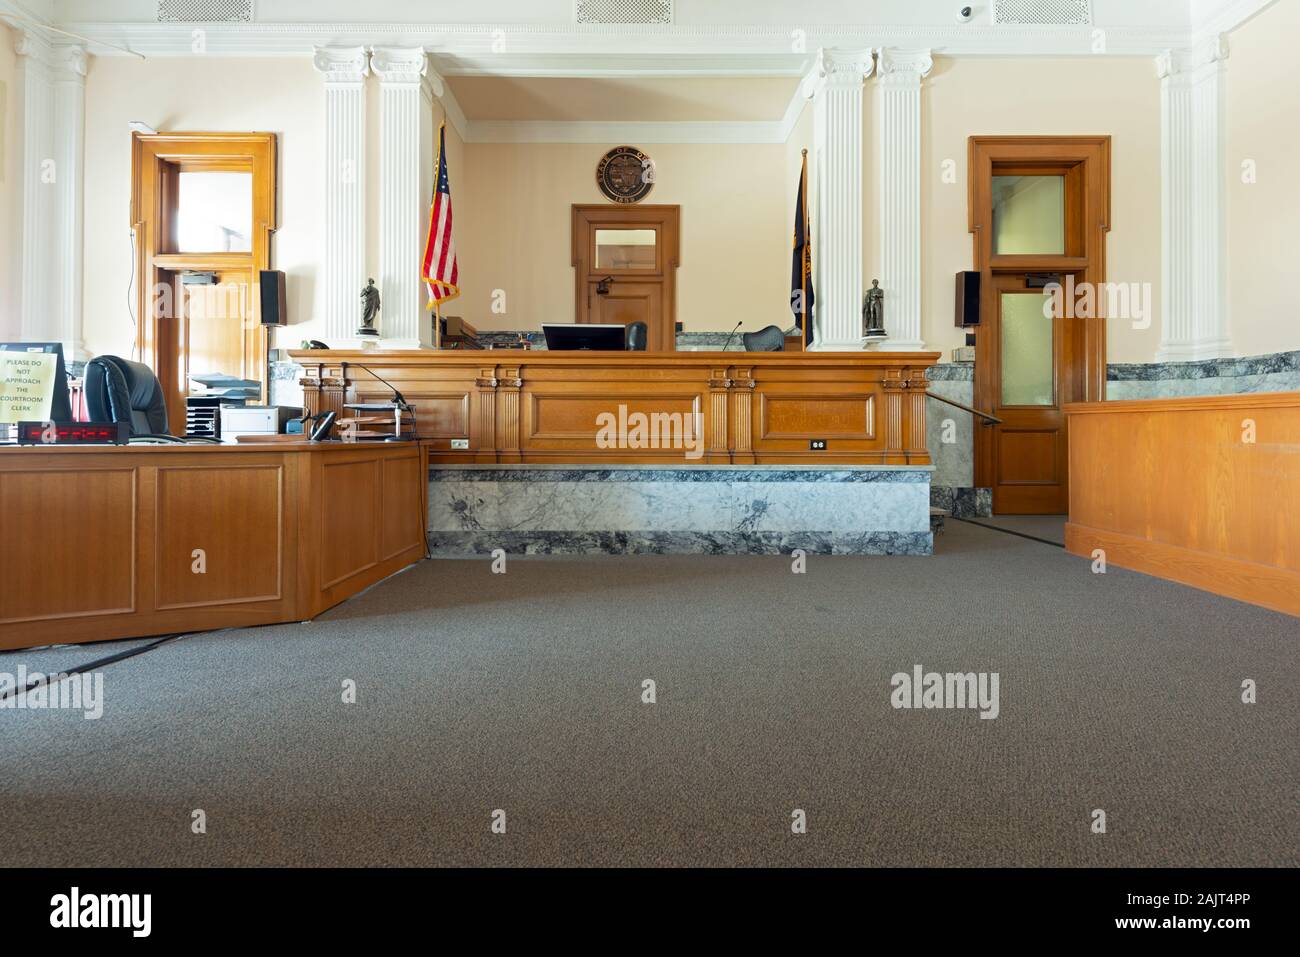 The Dalles, Oregon - April 22, 2016: The Bench in the Courtroom in the Wasco County Courthouse Stock Photo